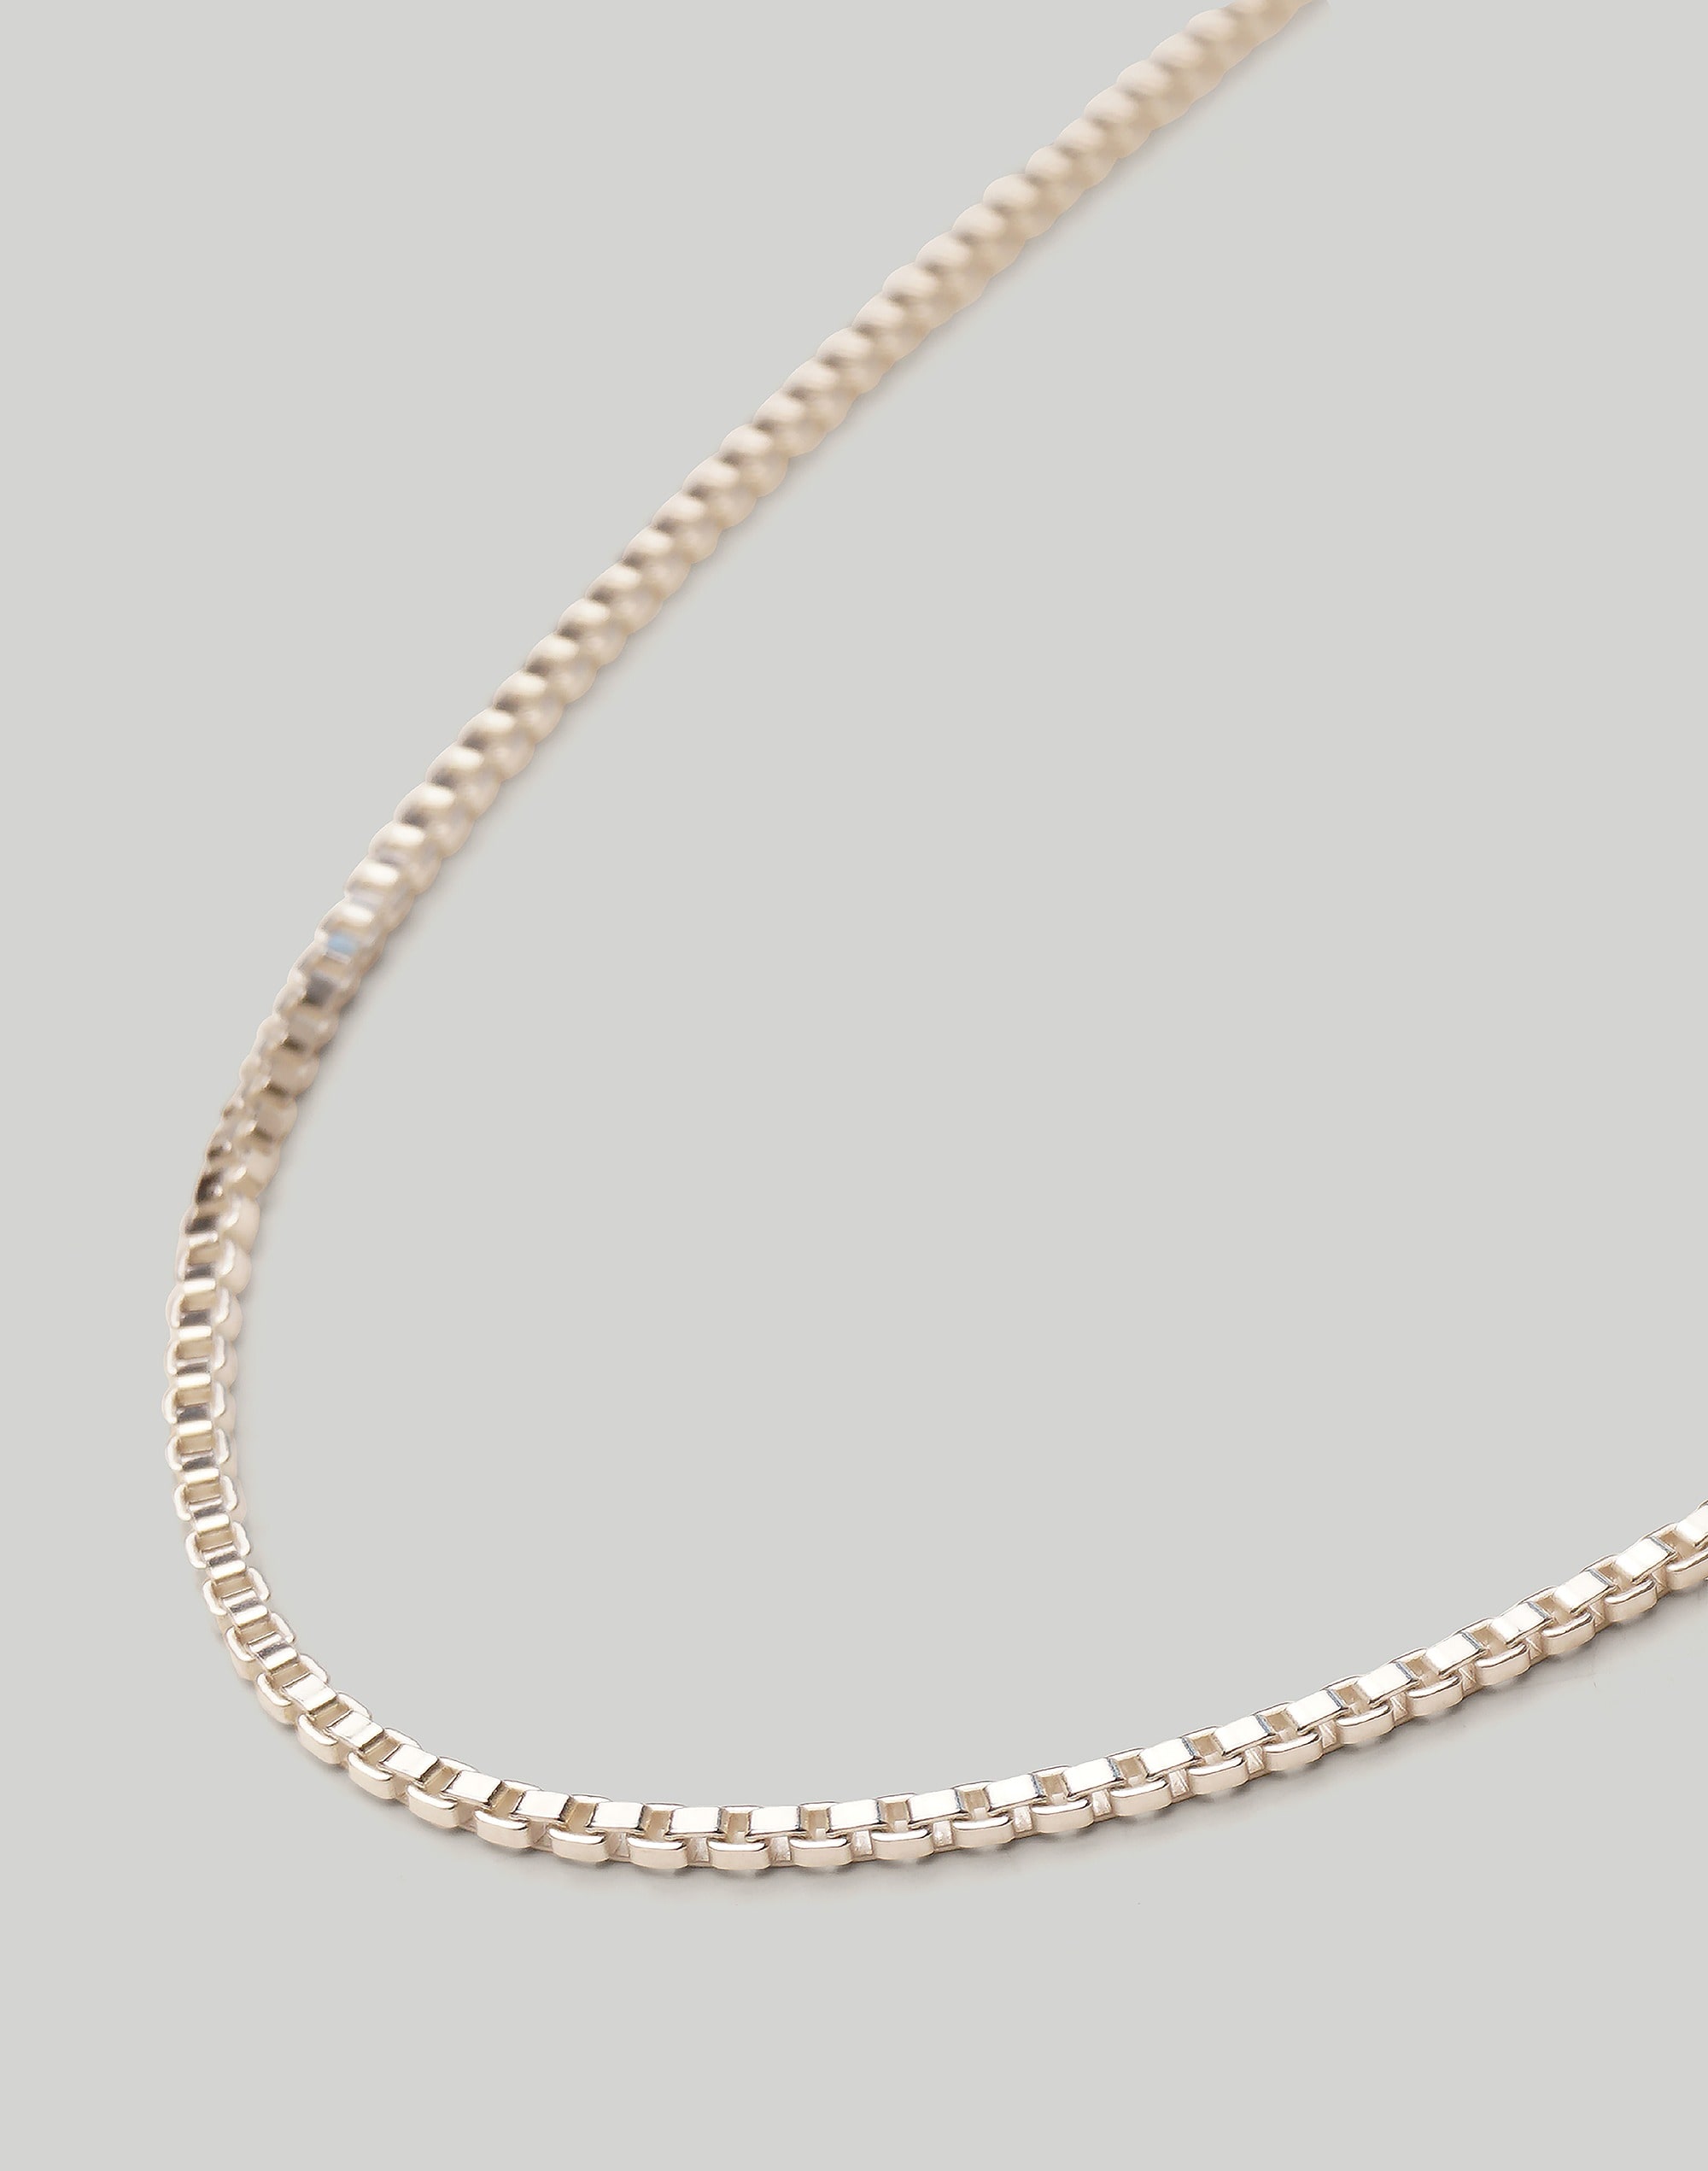 CHARLOTTE CAUWE STUDIO CLASSIC BOX CHAIN NECKLACE IN STERLING SILVER